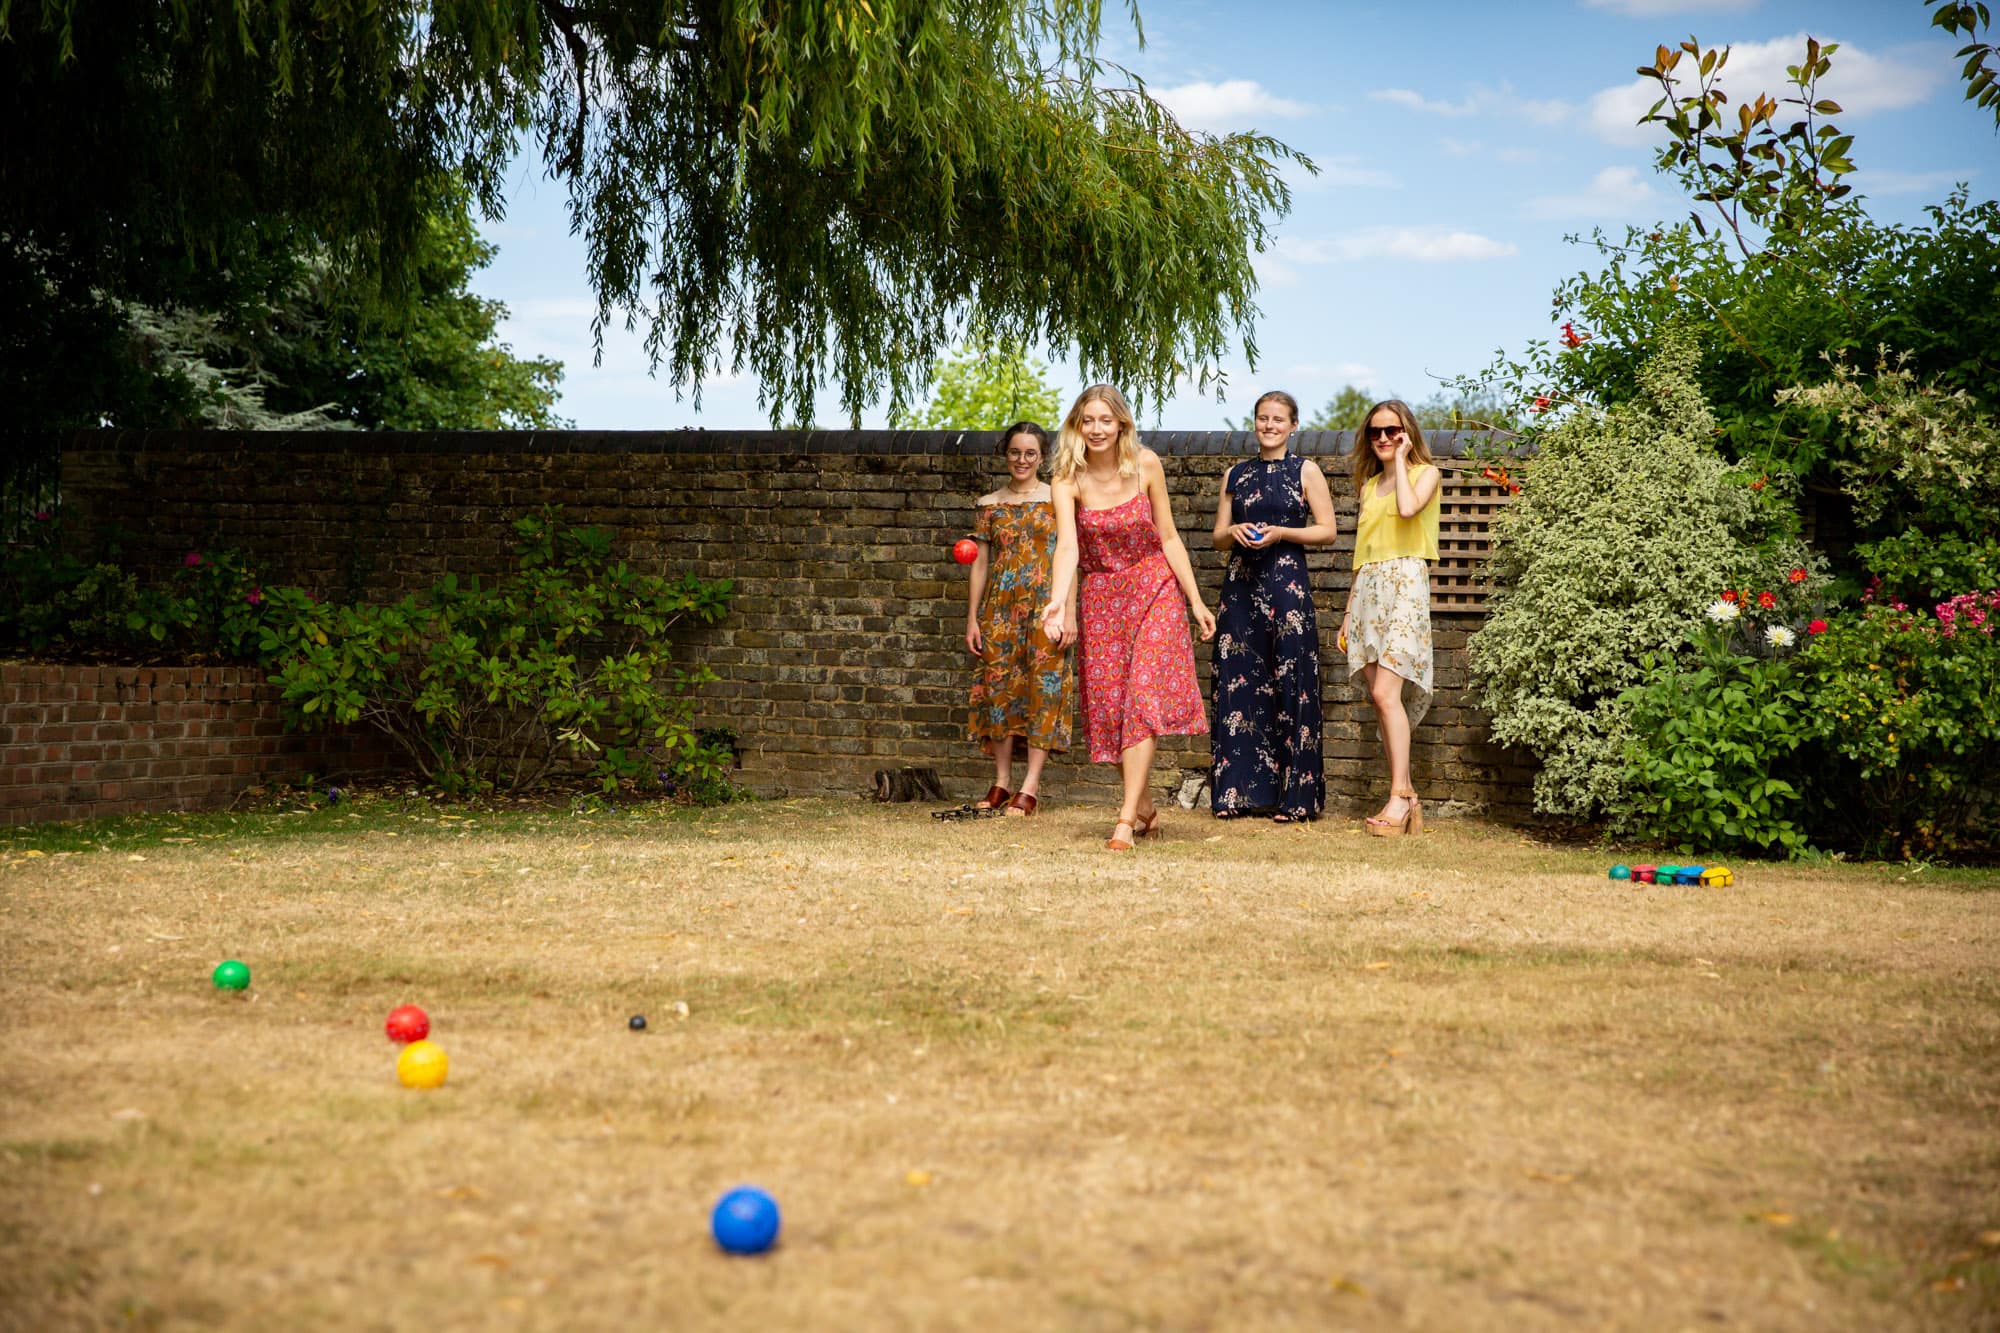 Guests playing boules on grass at wedding at Oaks Farm Weddings